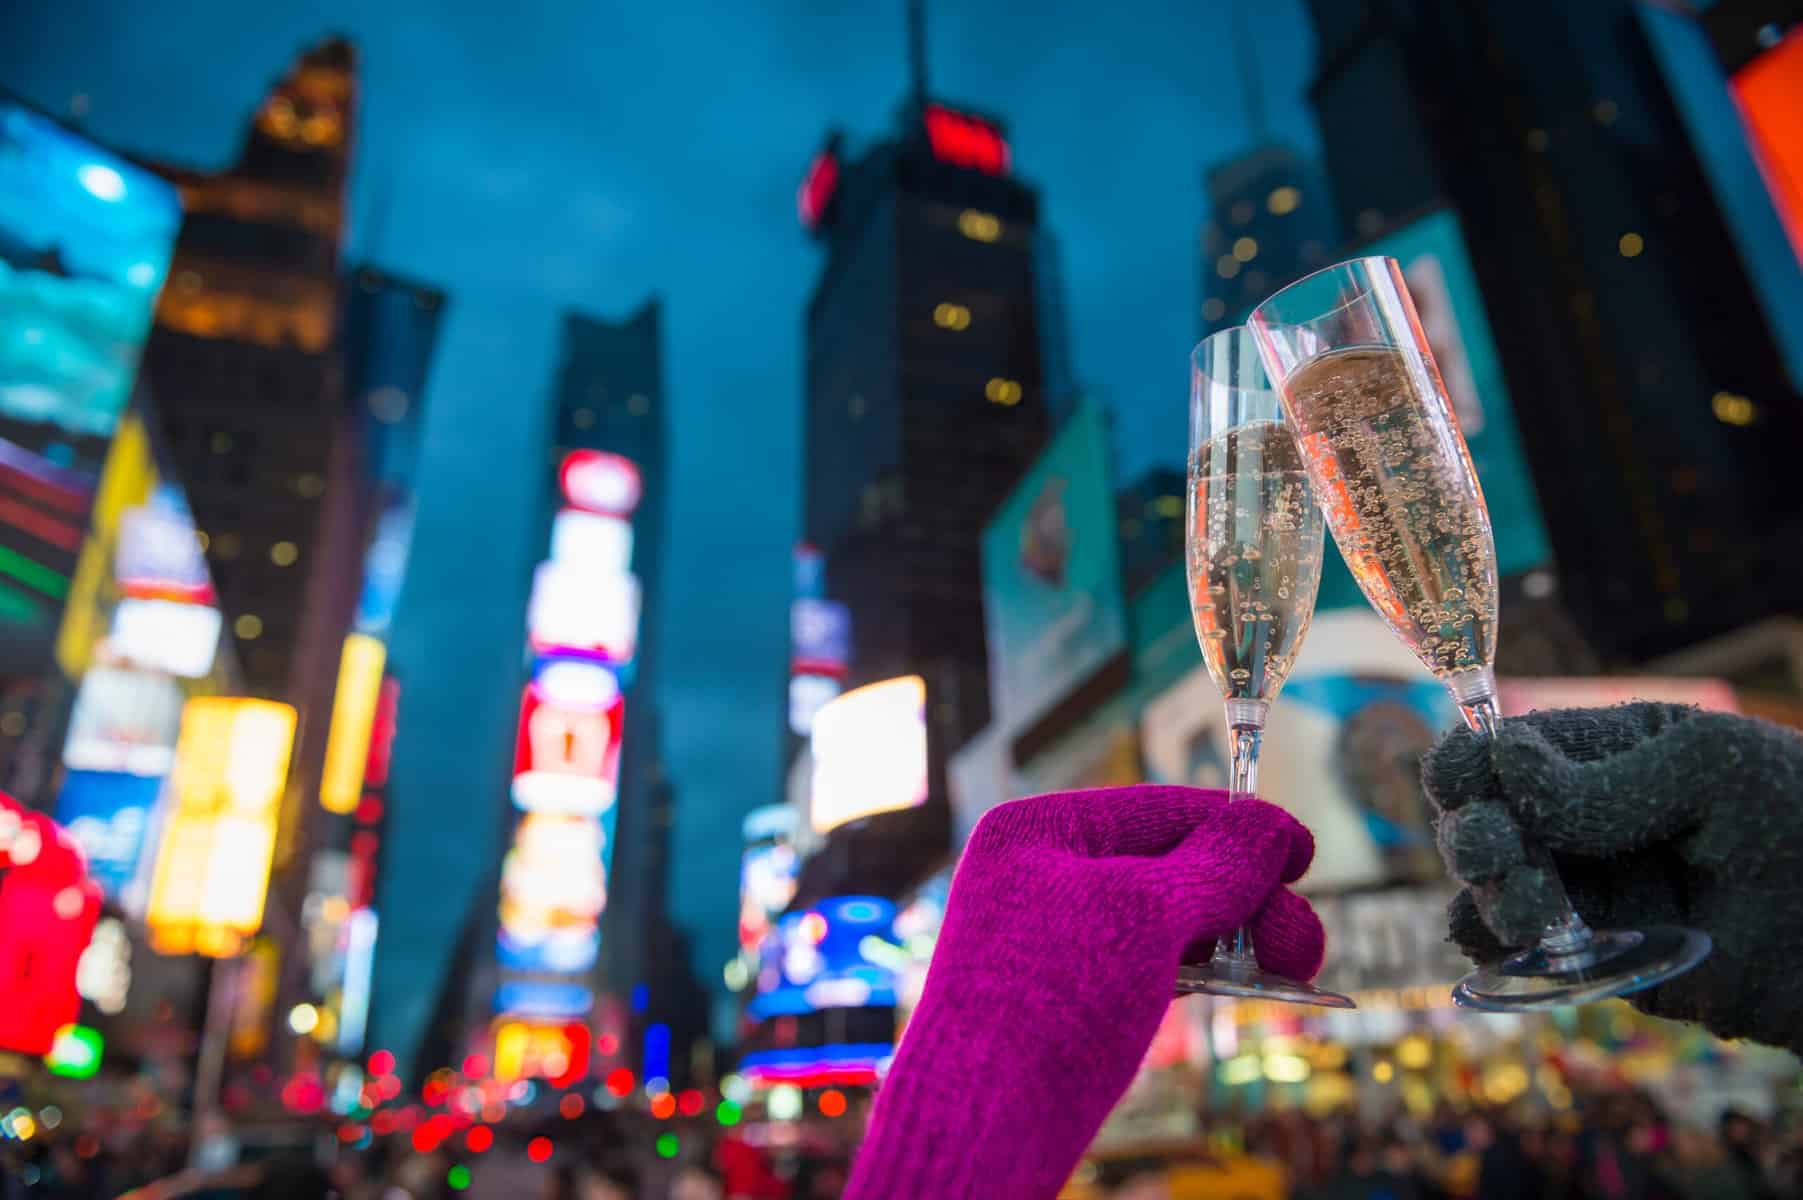 [Press Release] Beyond Times Square Launches 2022 VIP New Year’s Eve Gala in Times Square